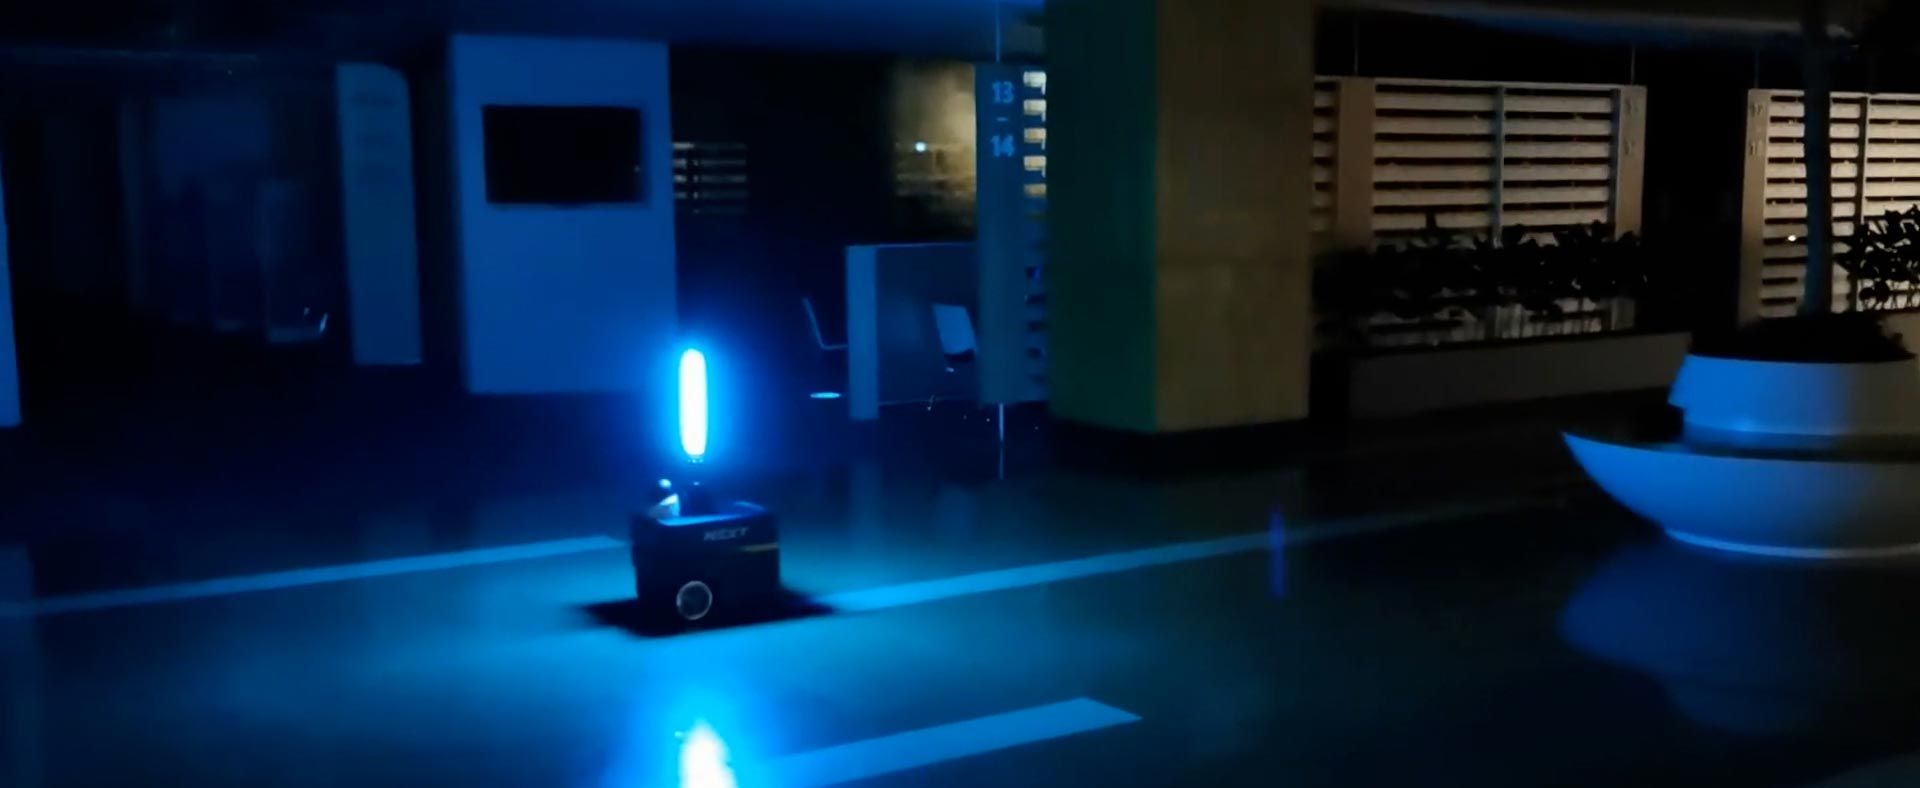 An autonomous robot inside a commercial space with a mounted UV light disinfects building interiors. 